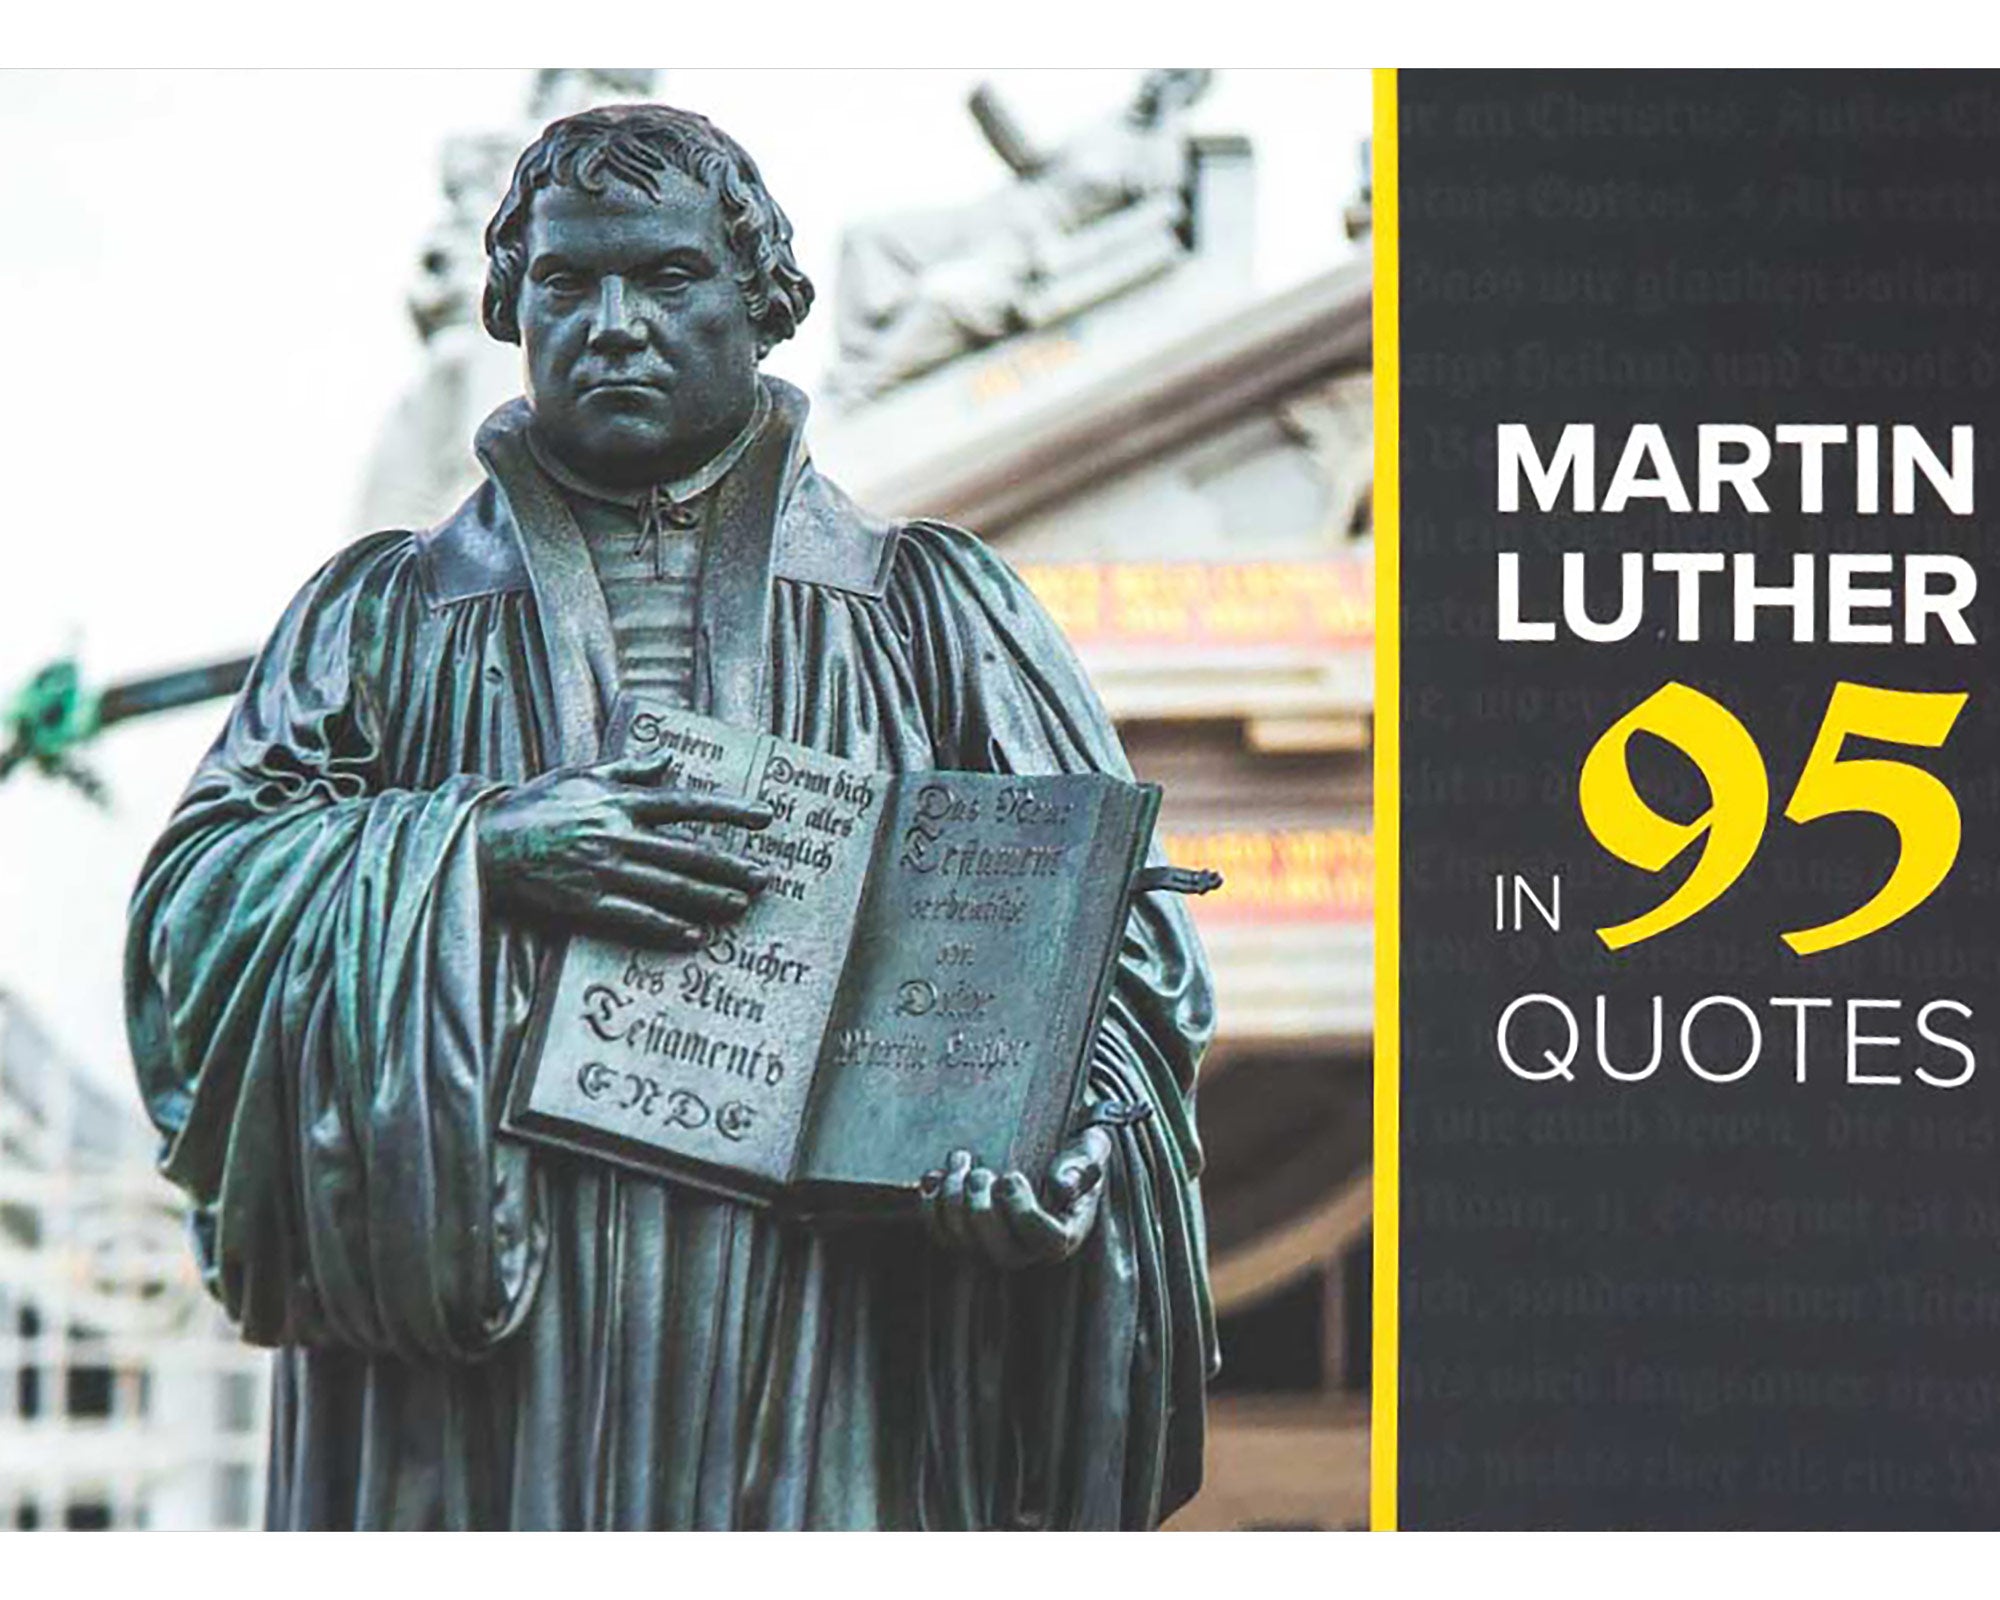 Martin Luther in 95 Quotes